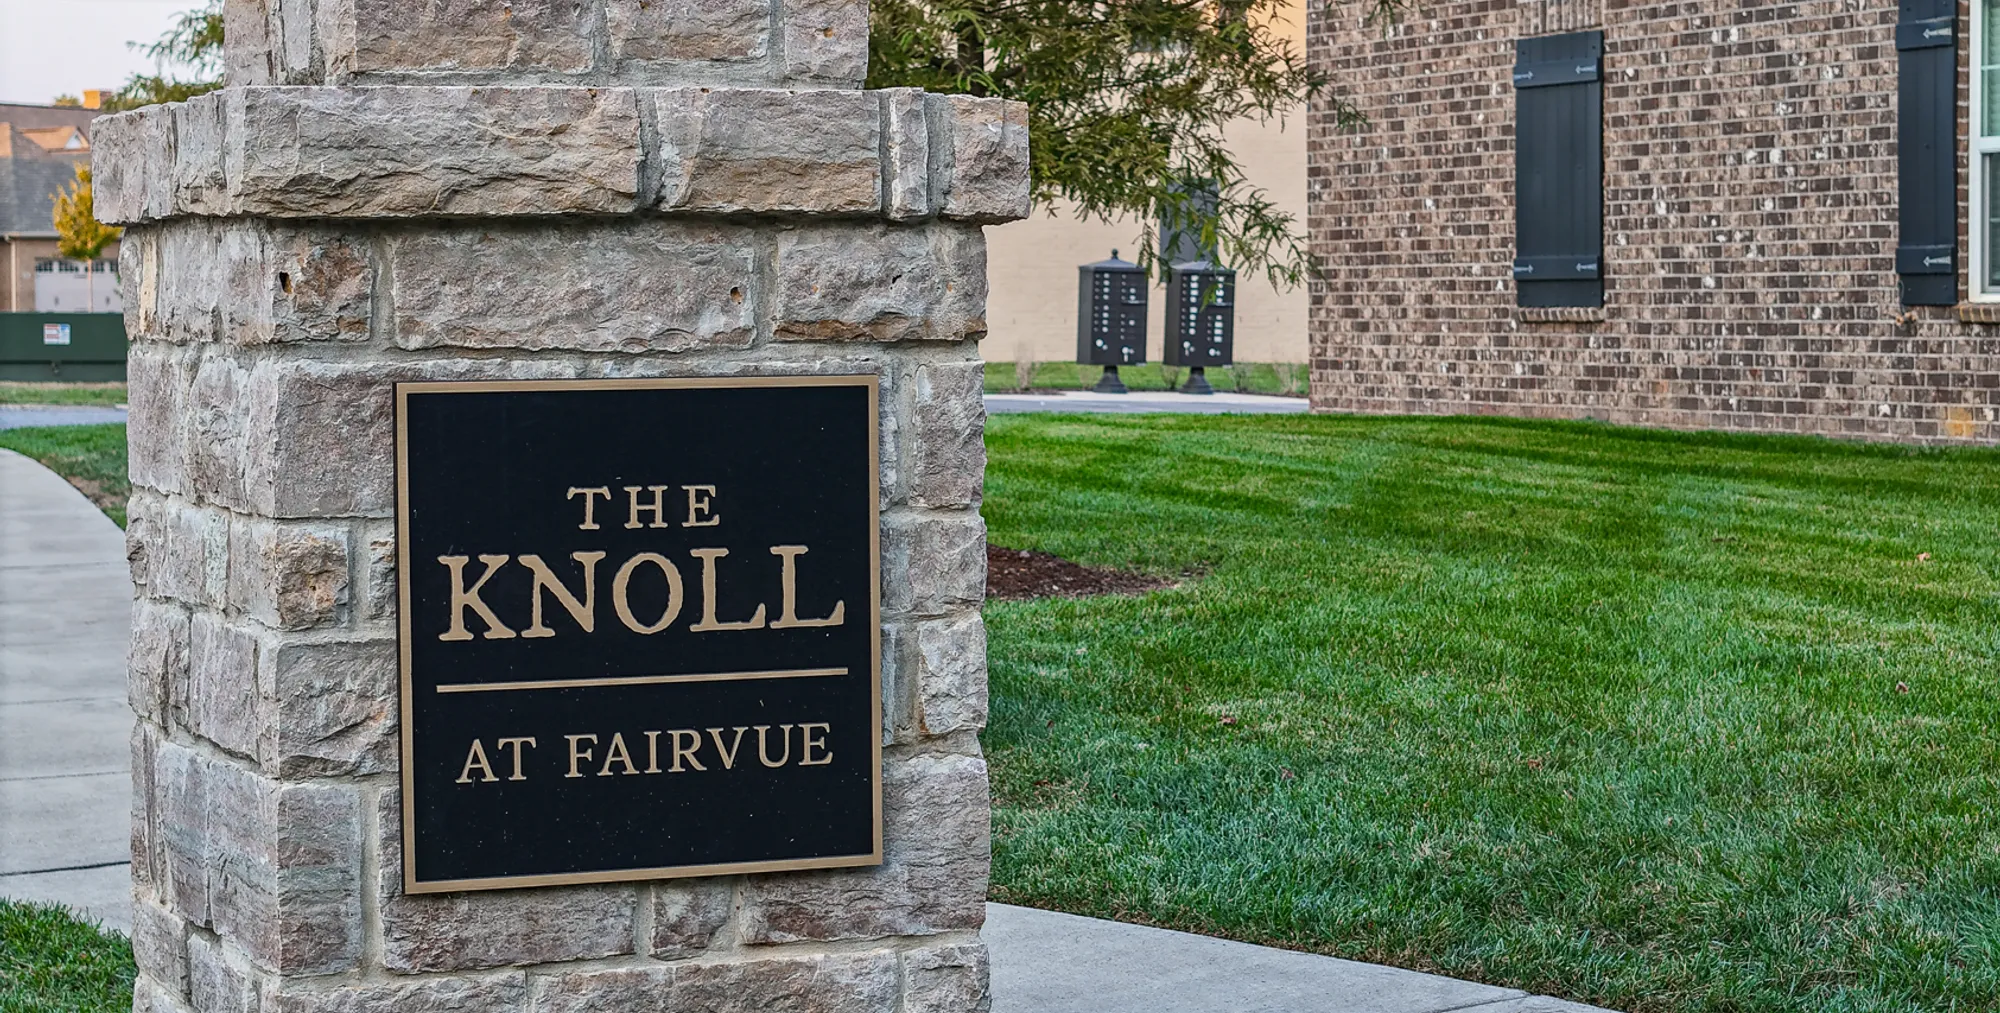 The Knoll at Fairvue in Gallatin, TN